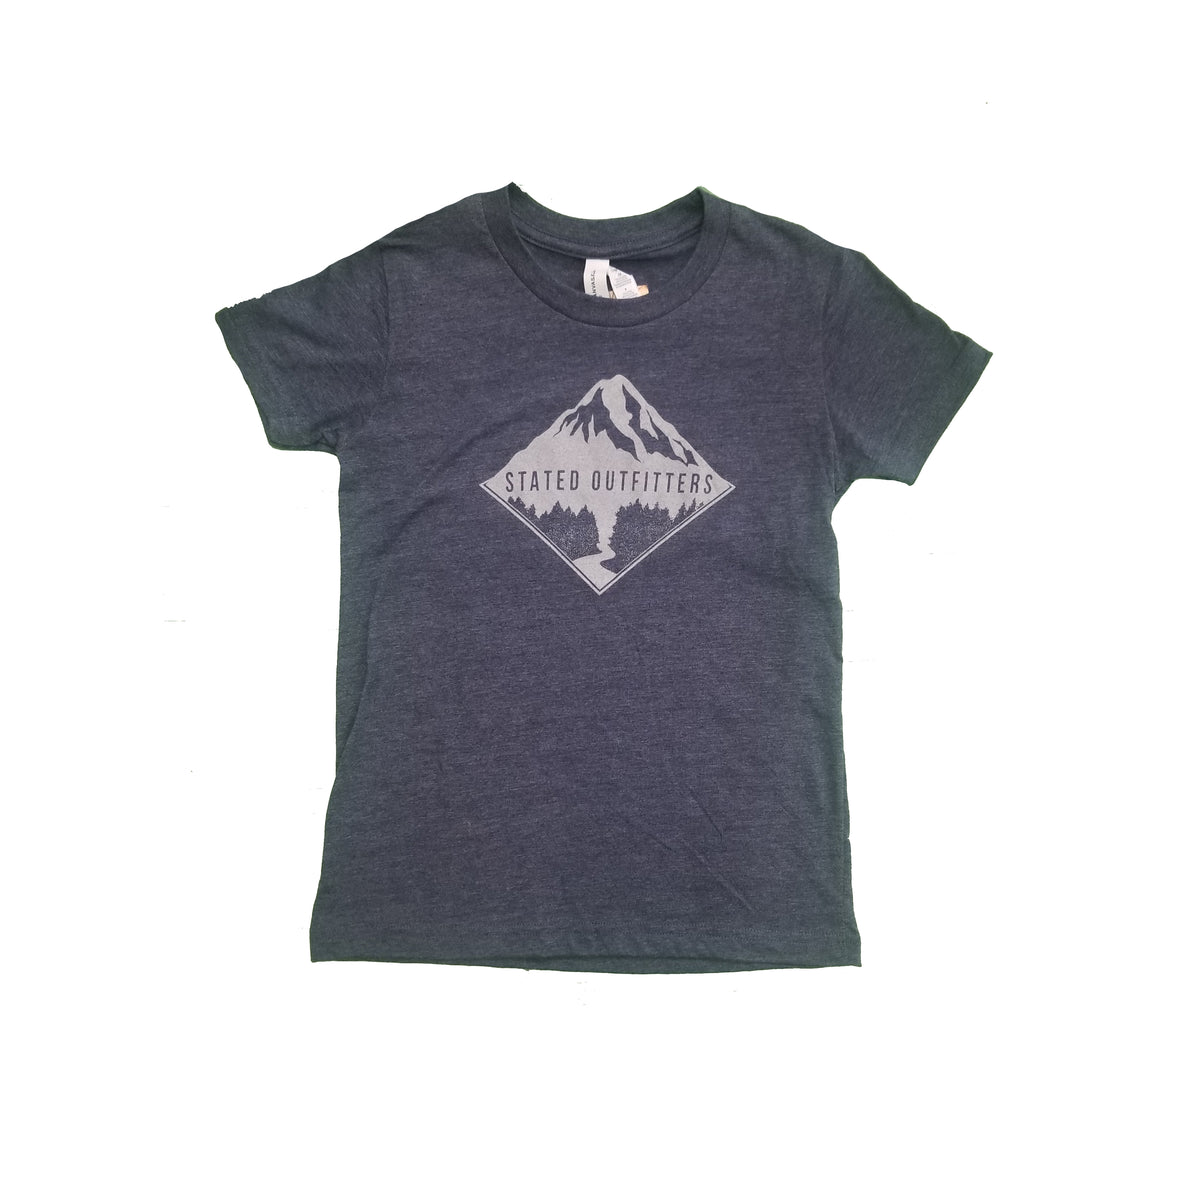 Stated Outfitters Youth Charcoal/ Grey Mountain Tee